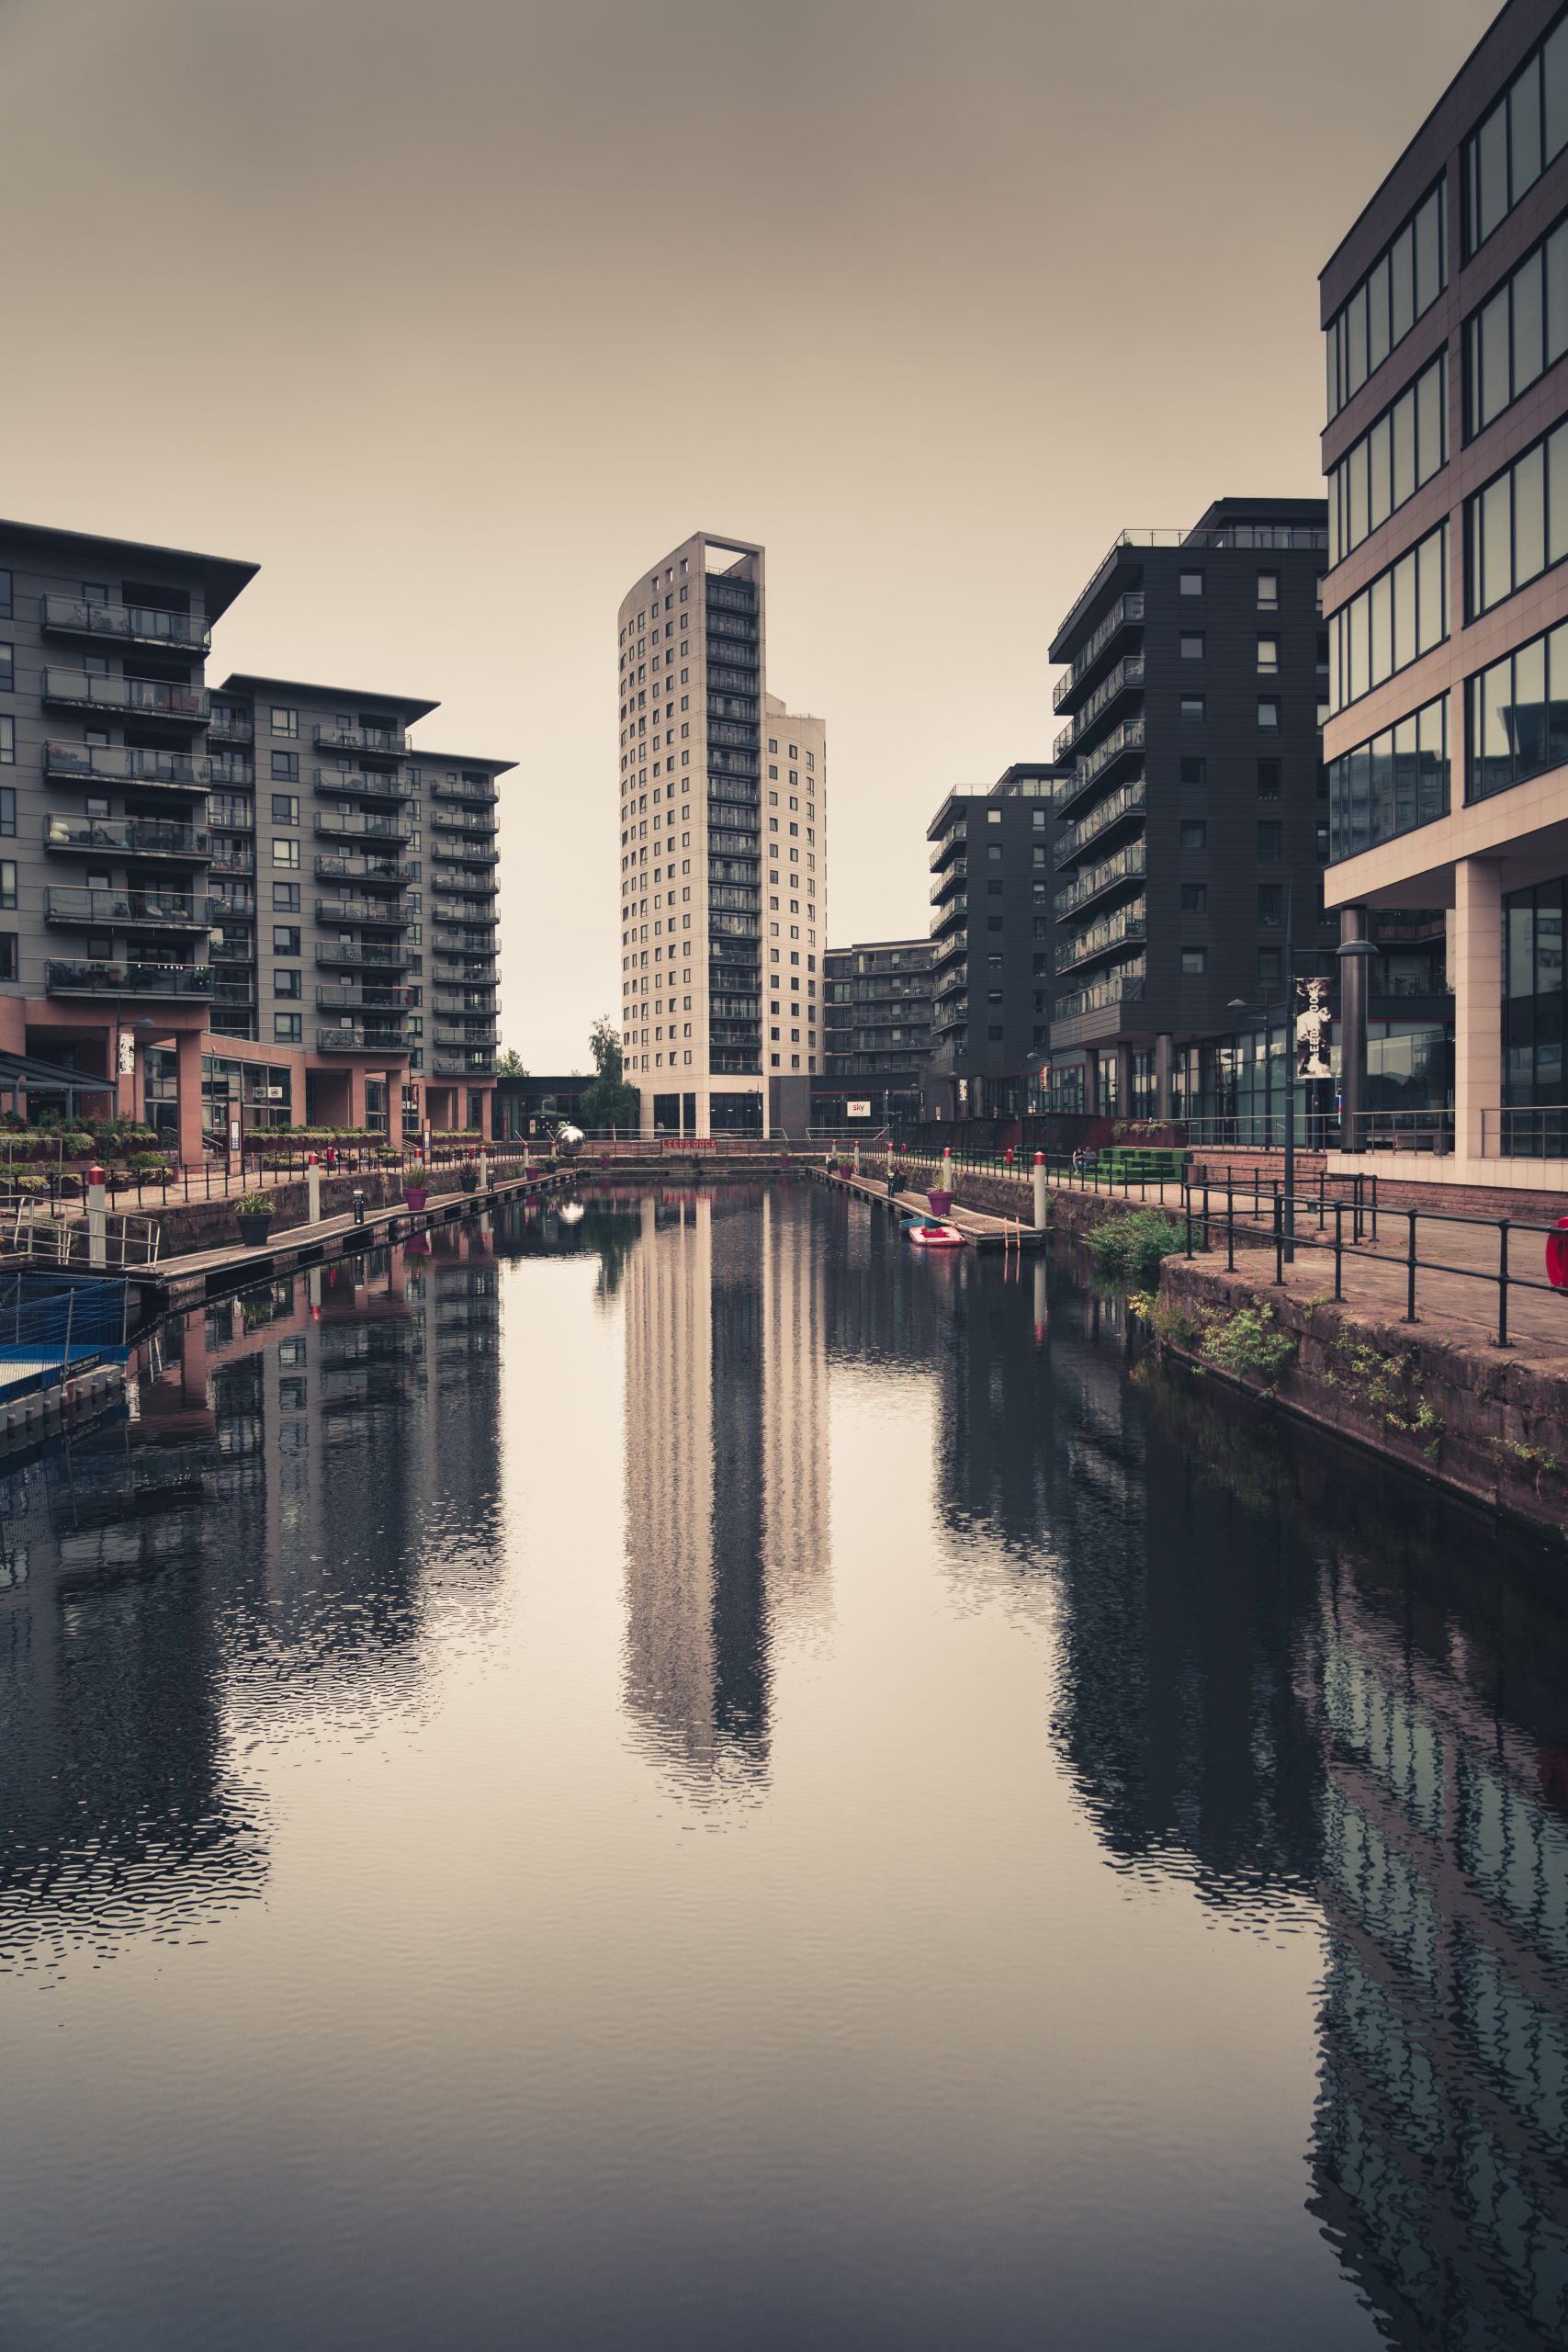 Jonny Gios Photo of Canal in Leeds showing tall buildings and reflection in the water